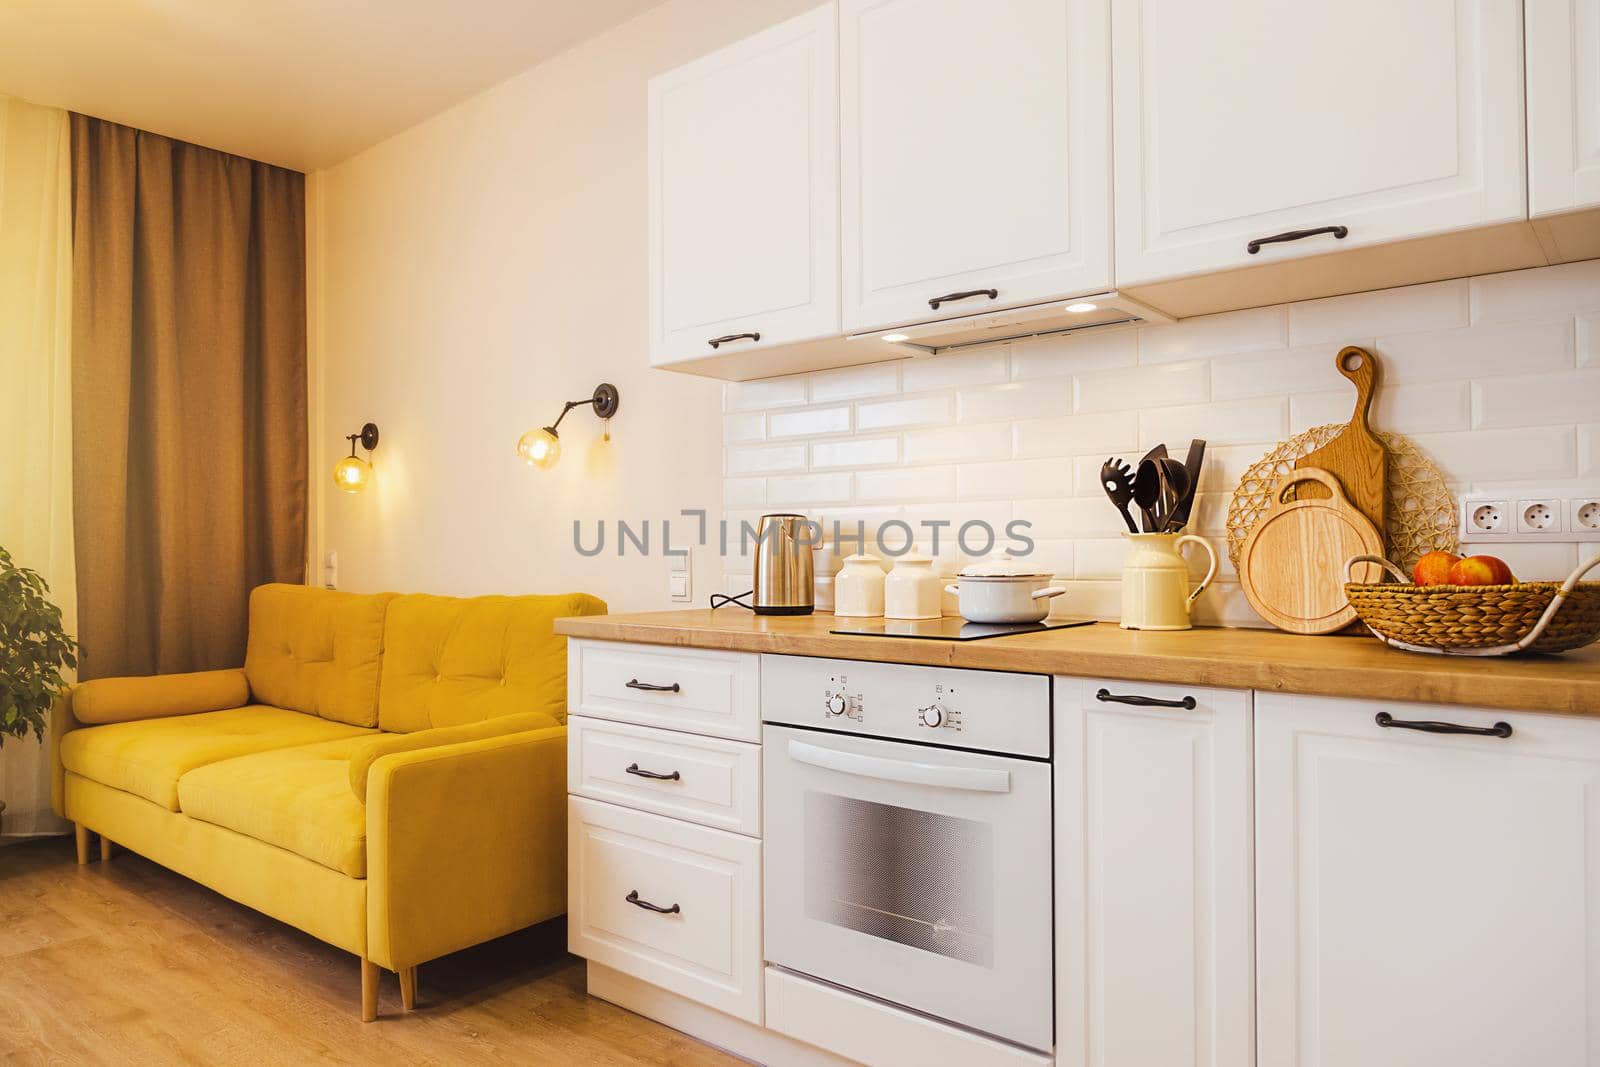 The general plan, a small cozy apartment - studio. cozy living room with a window and a yellow sofa, next to it is a white modern kitchen with appliances in one room. A soft cozy light burns